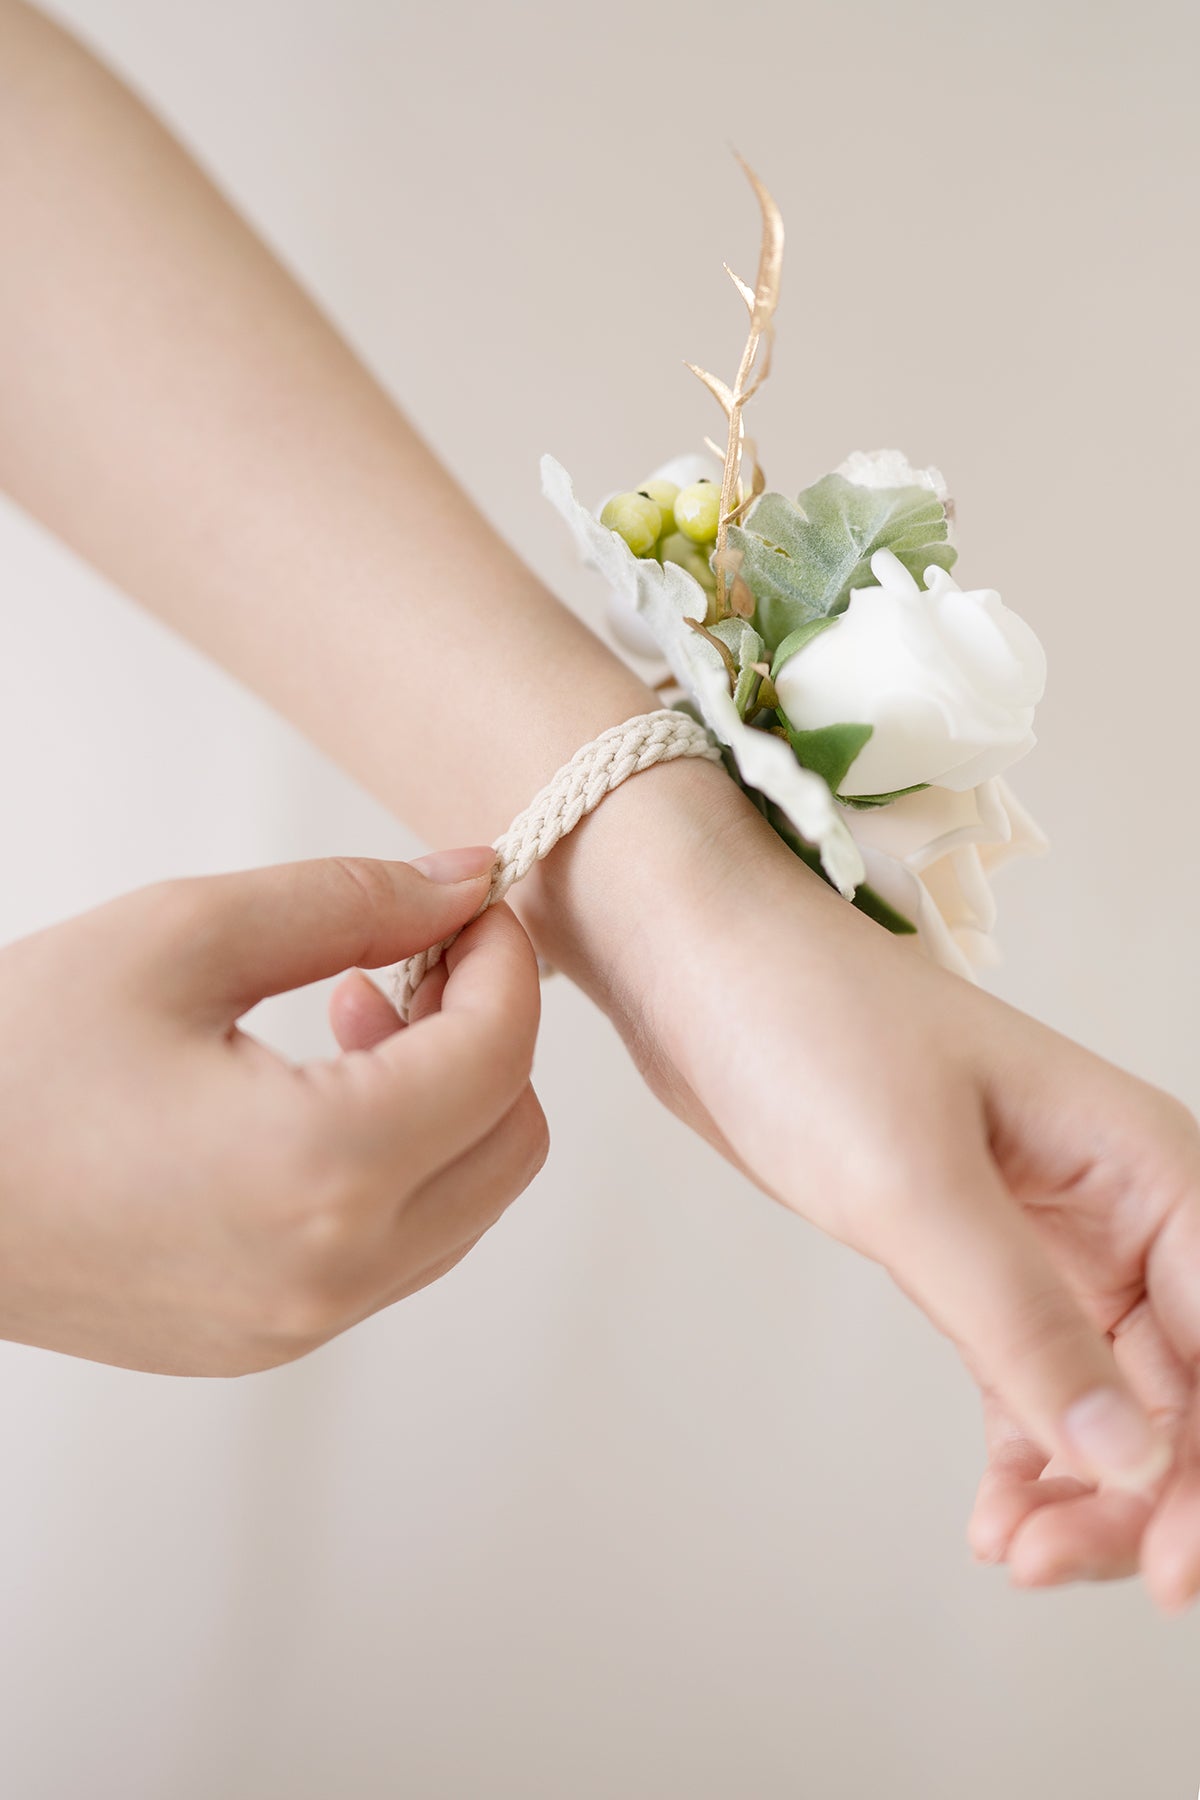 Ling's Moment Set of 2 Wrist Corsage for Wedding Ceremony for